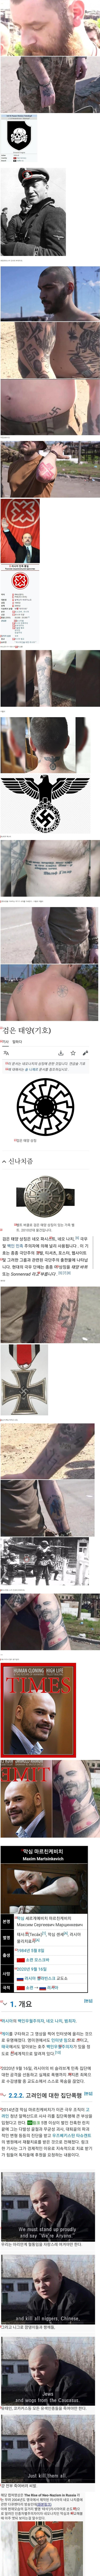 Ukraine Special Forces Tattoo Controversy